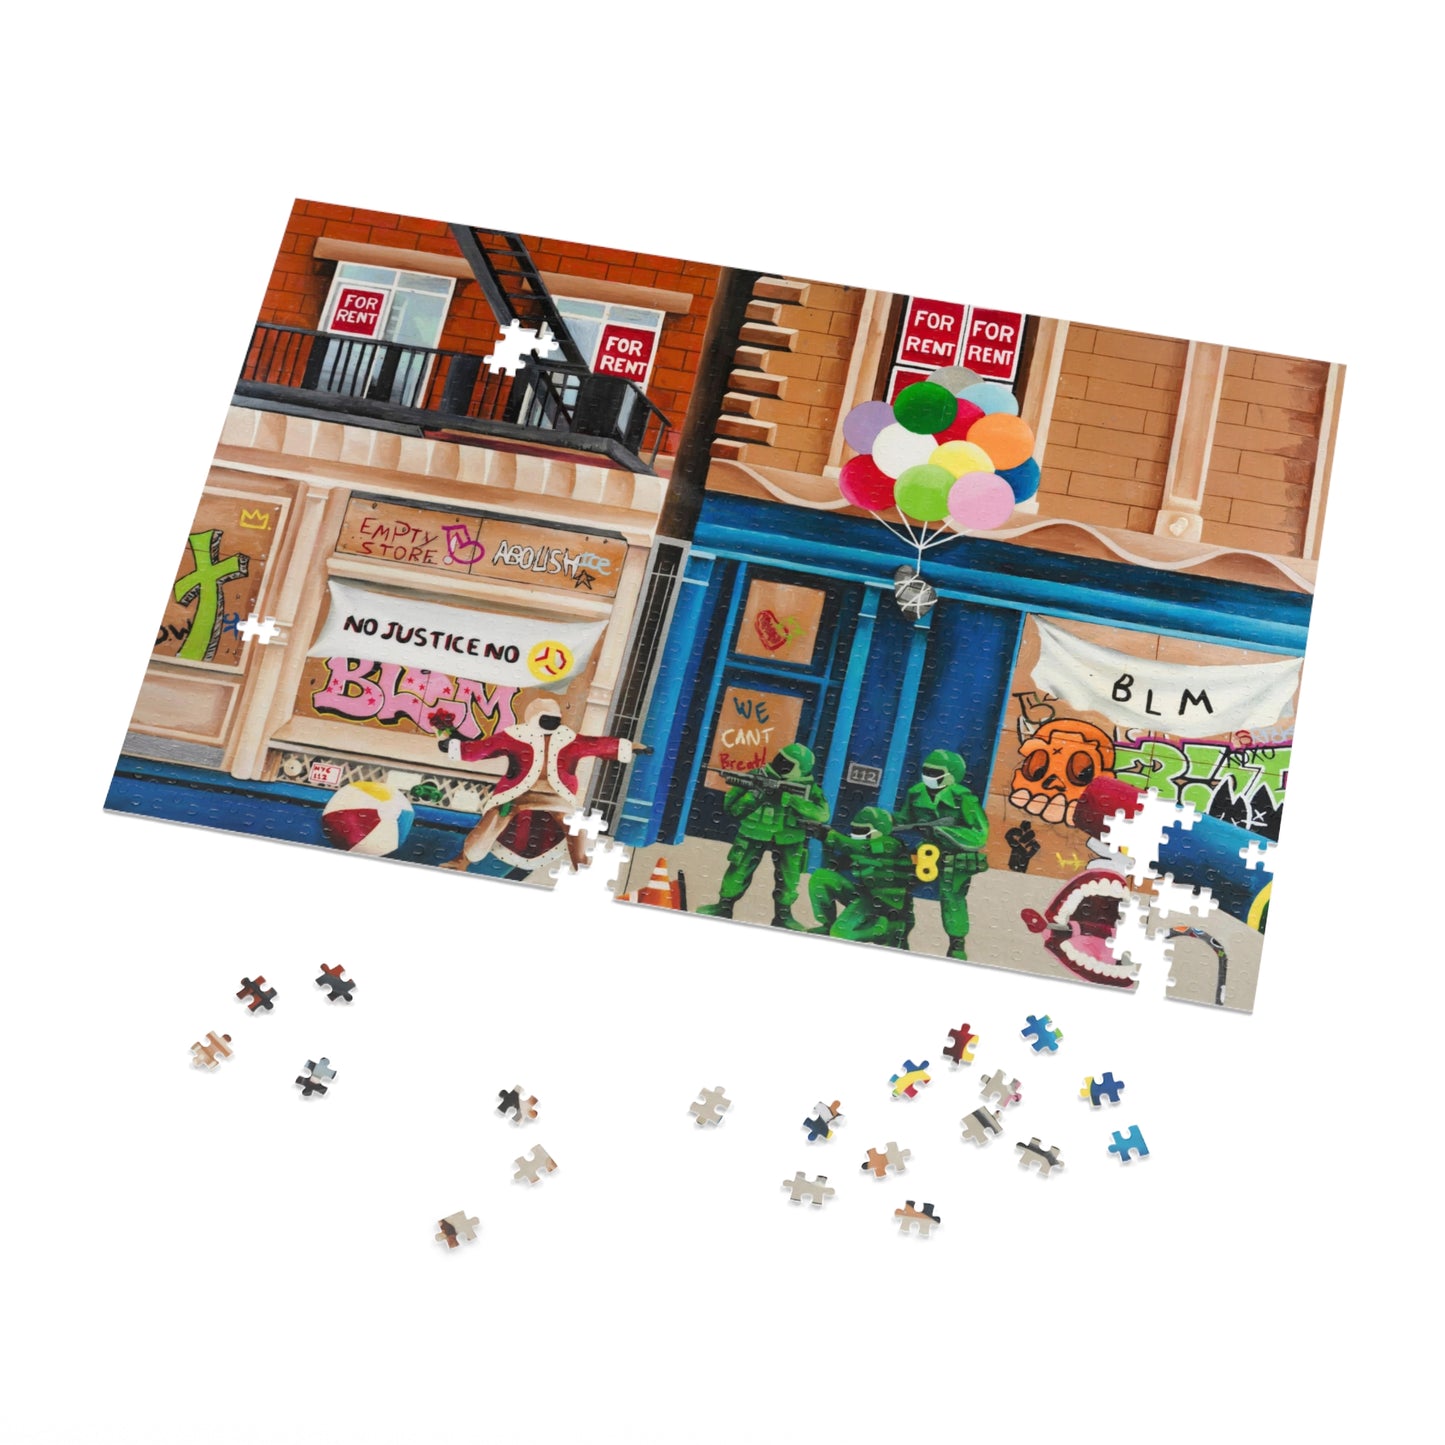 2020 VISION Jigsaw Puzzle